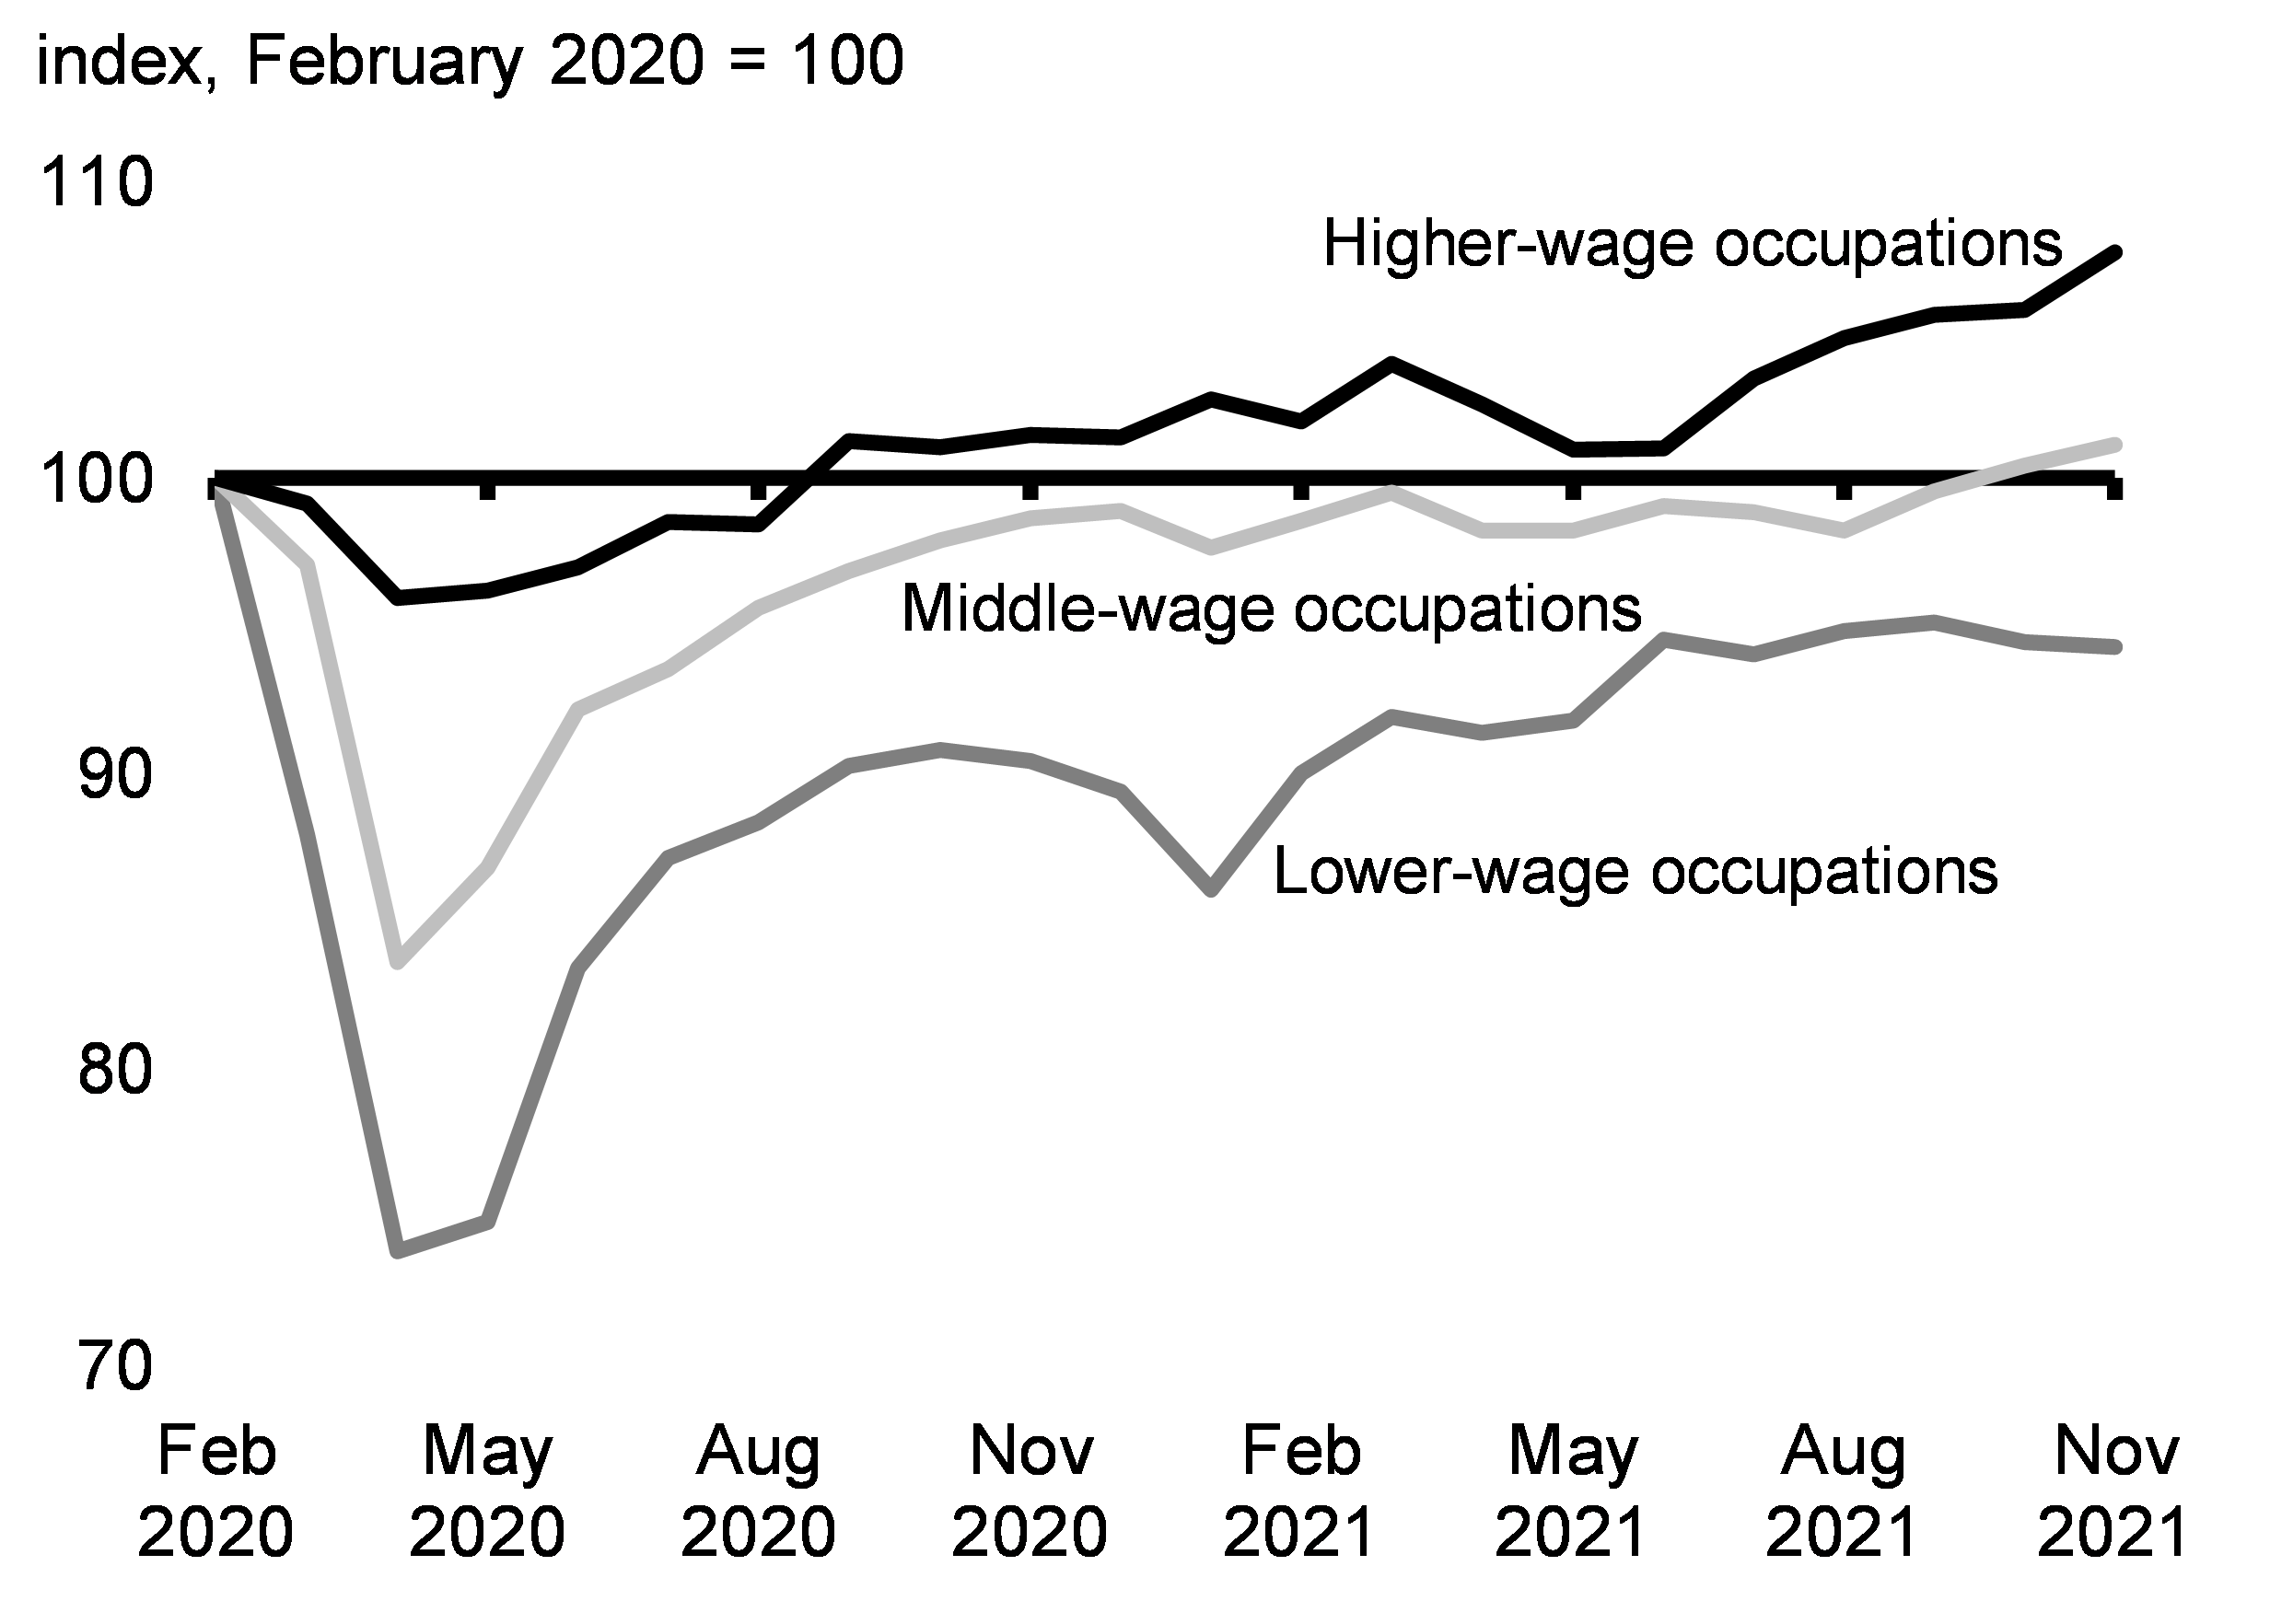 Chart 2.7: Employment Change by Wage Level Since February 2020